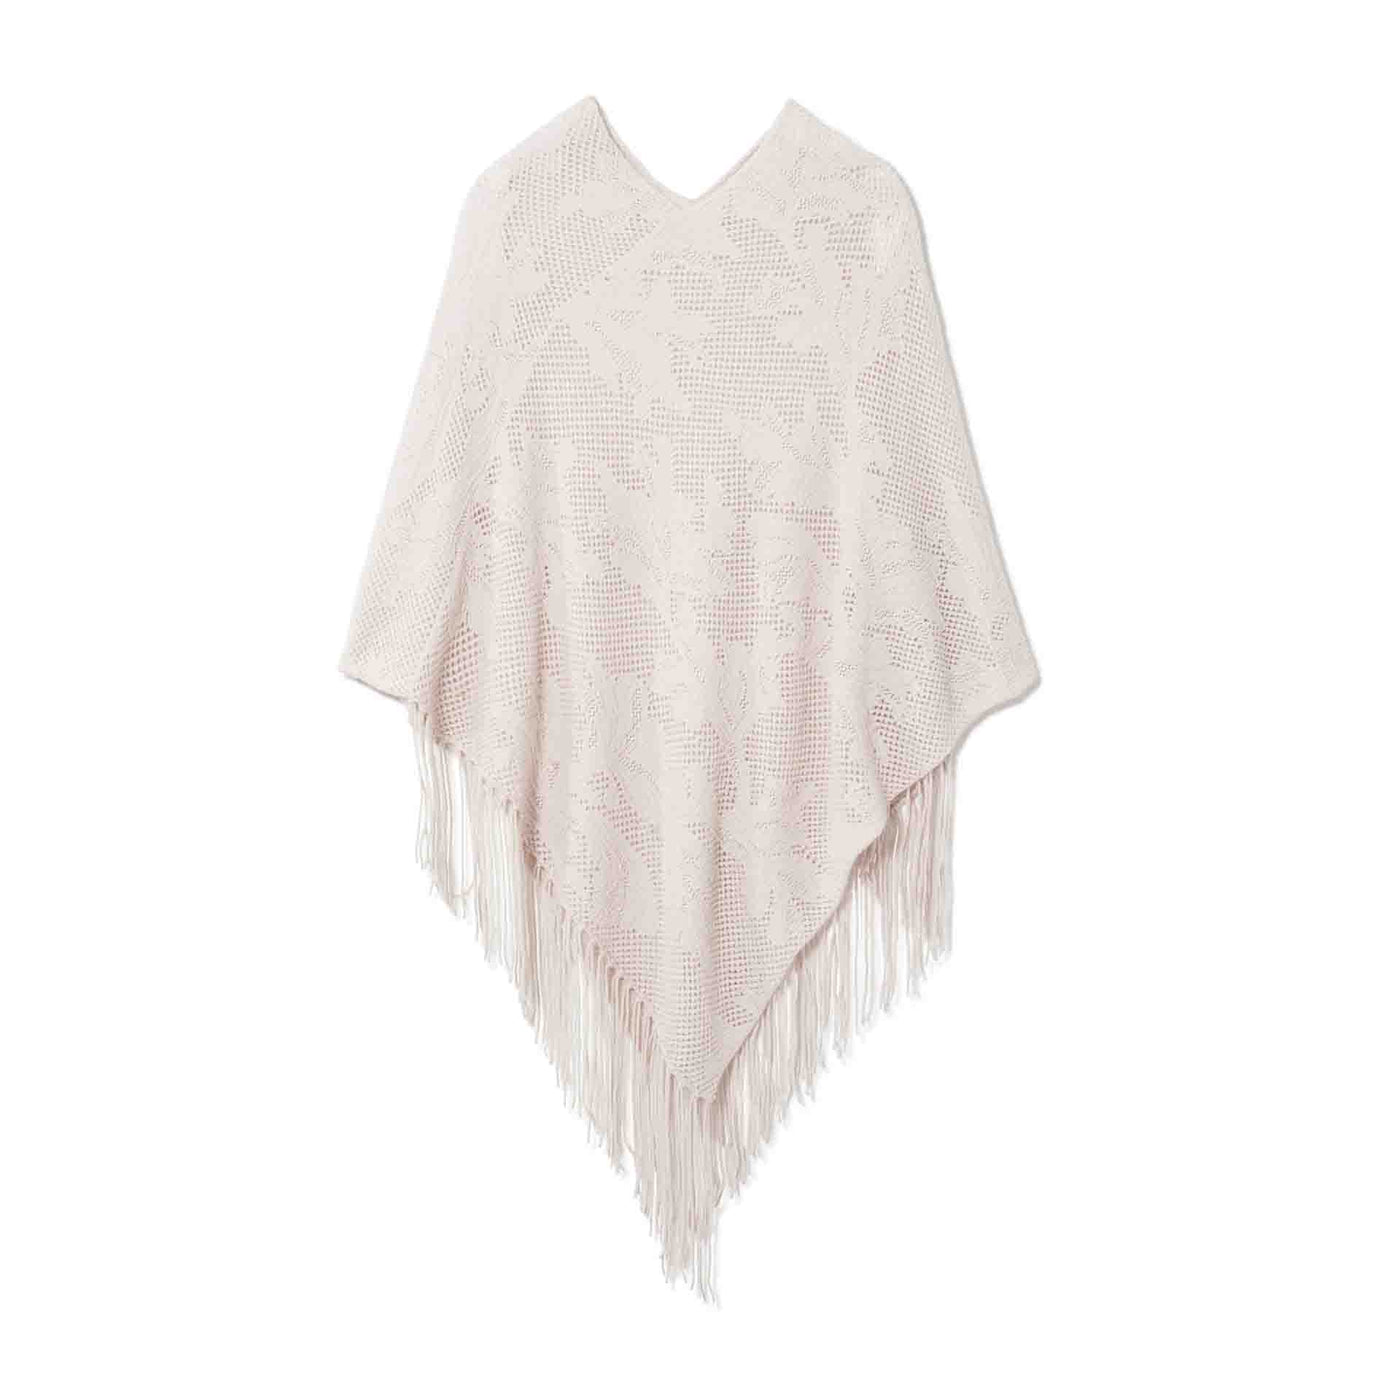 Women's Lace Poncho with Hand Knotted Fringe - Powder